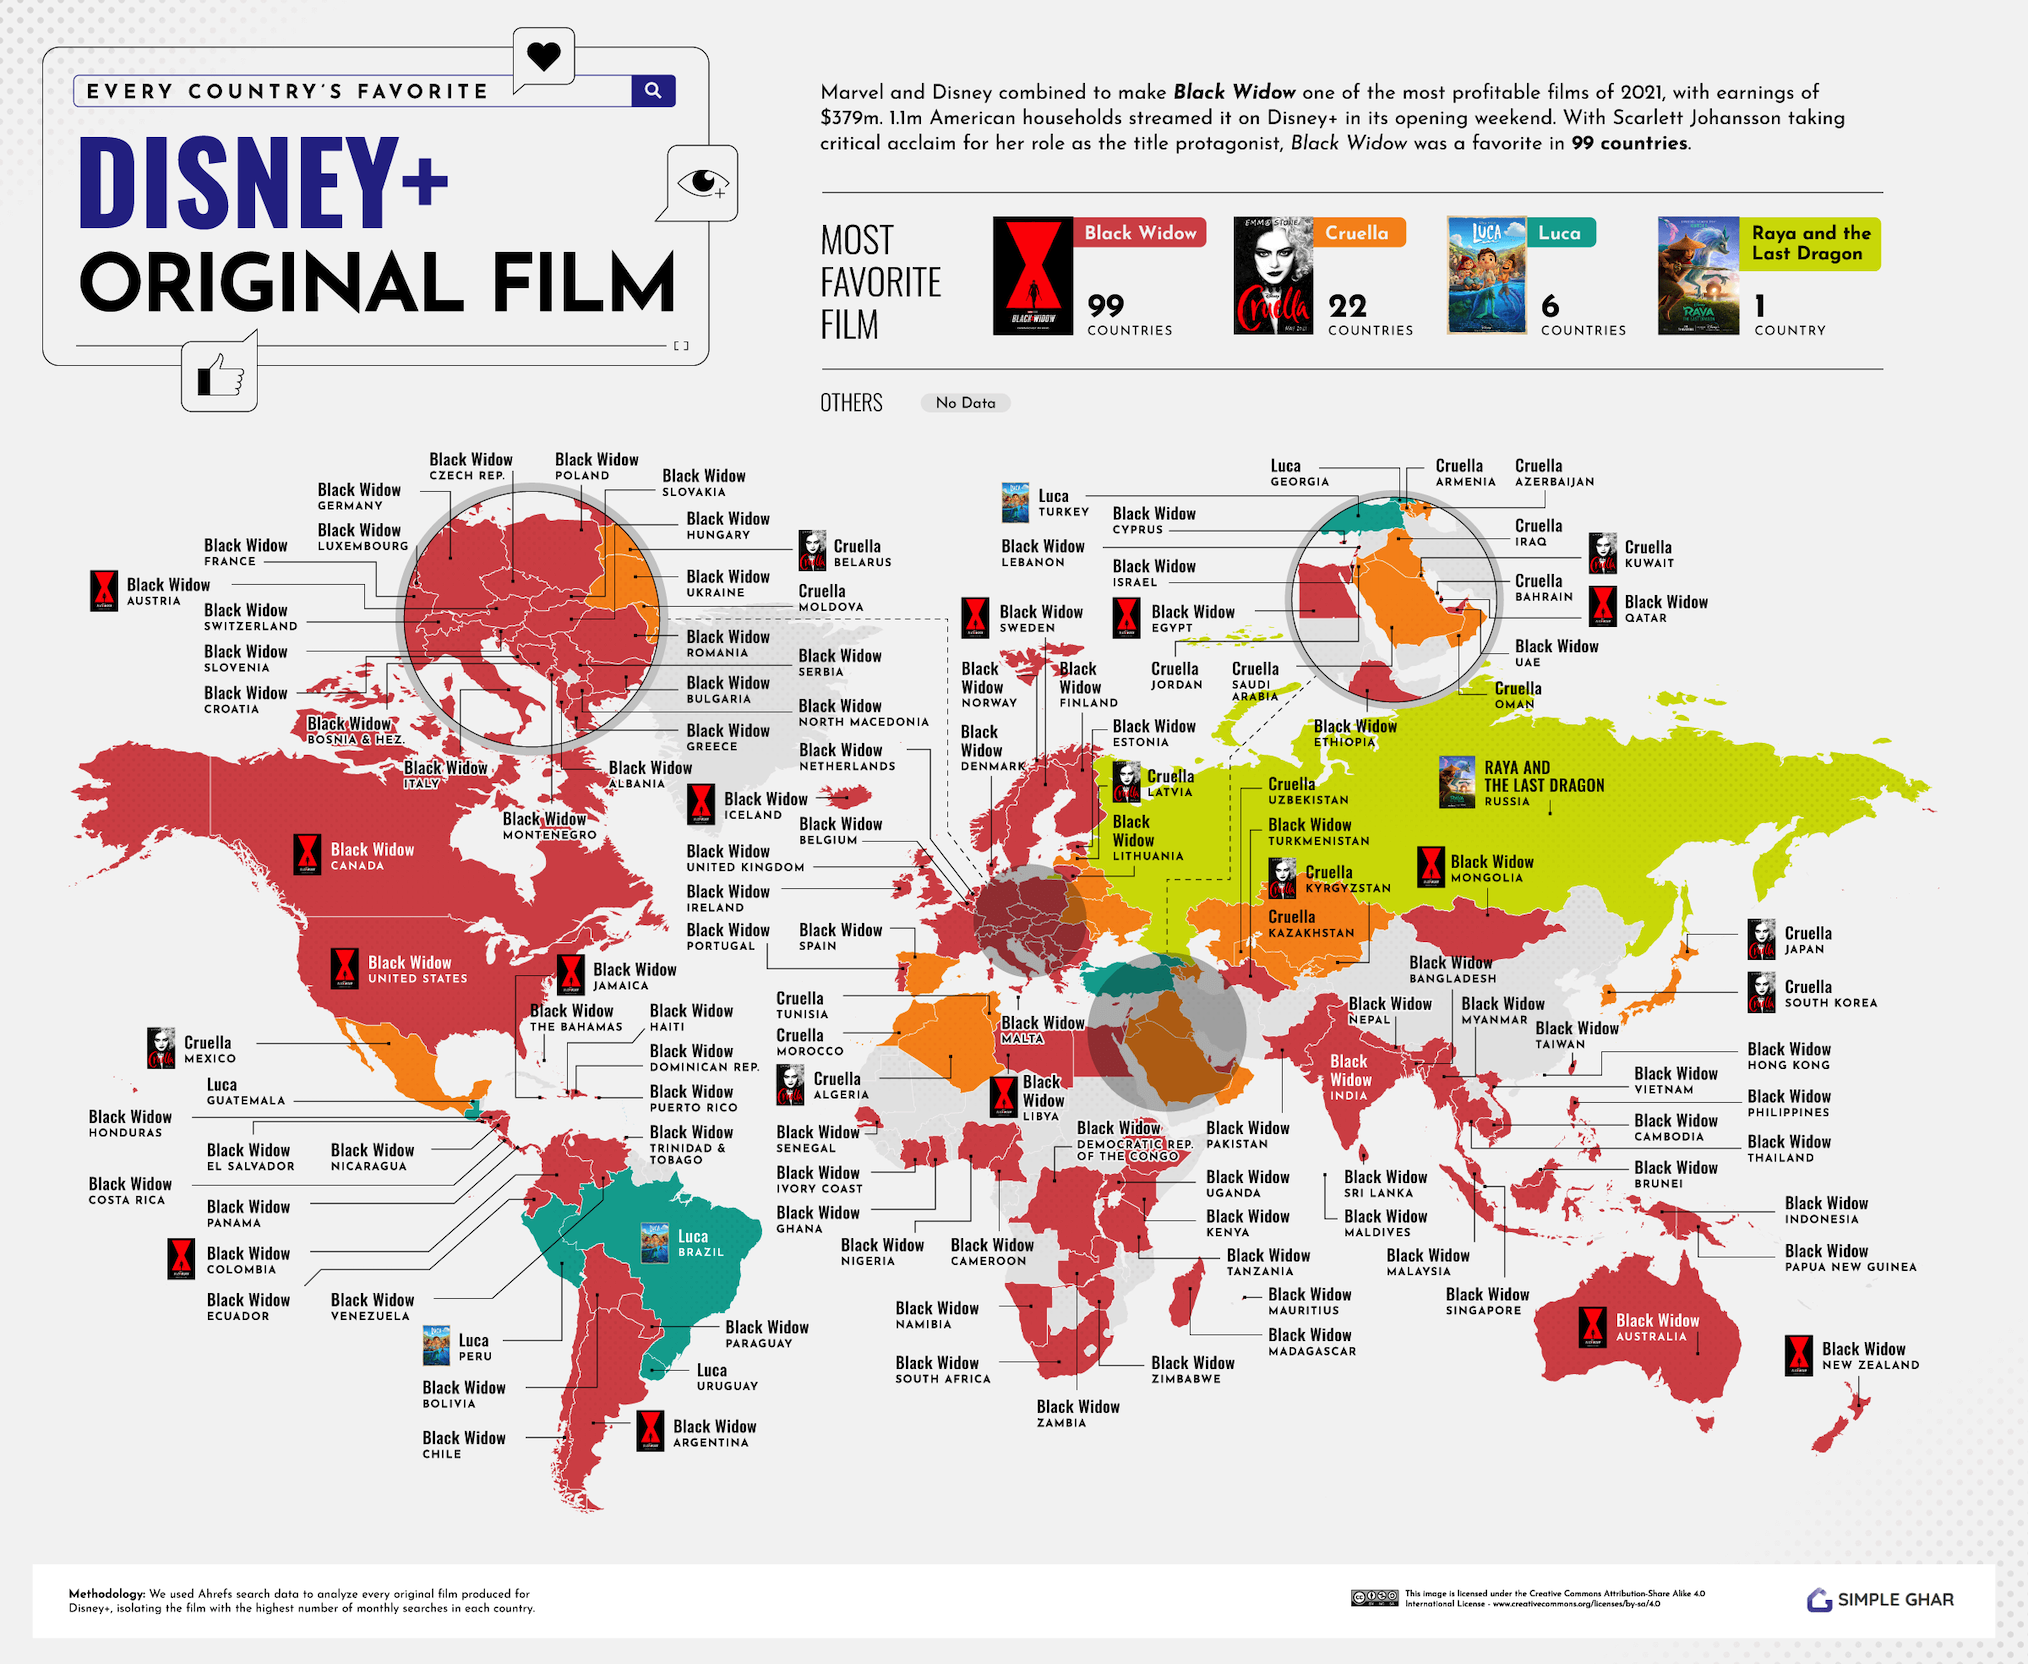 Every country's favorite Disney+ film